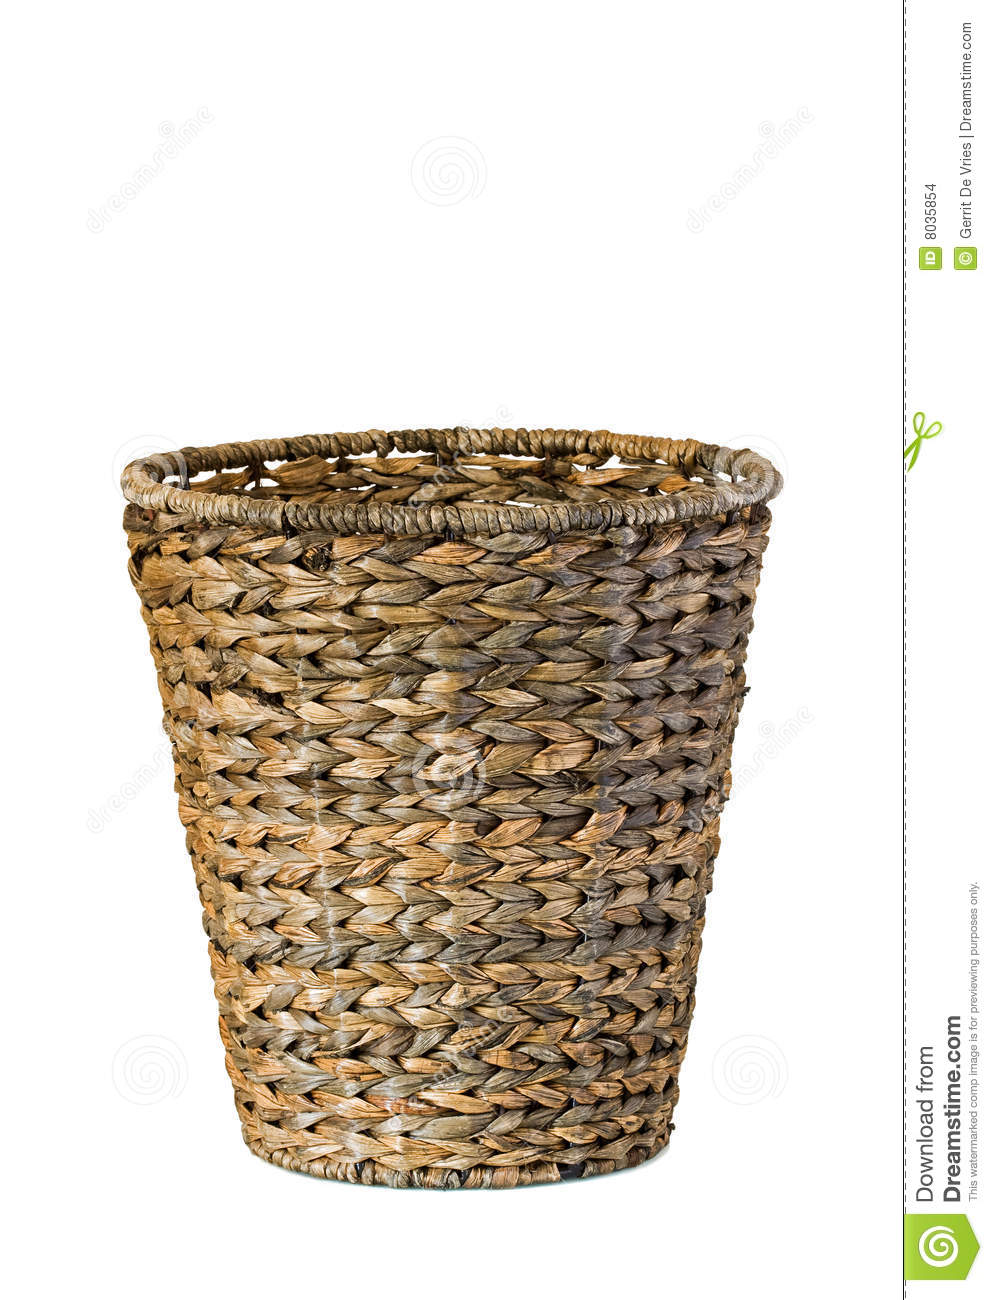 Woven Basket Stock Images   Image  8035854